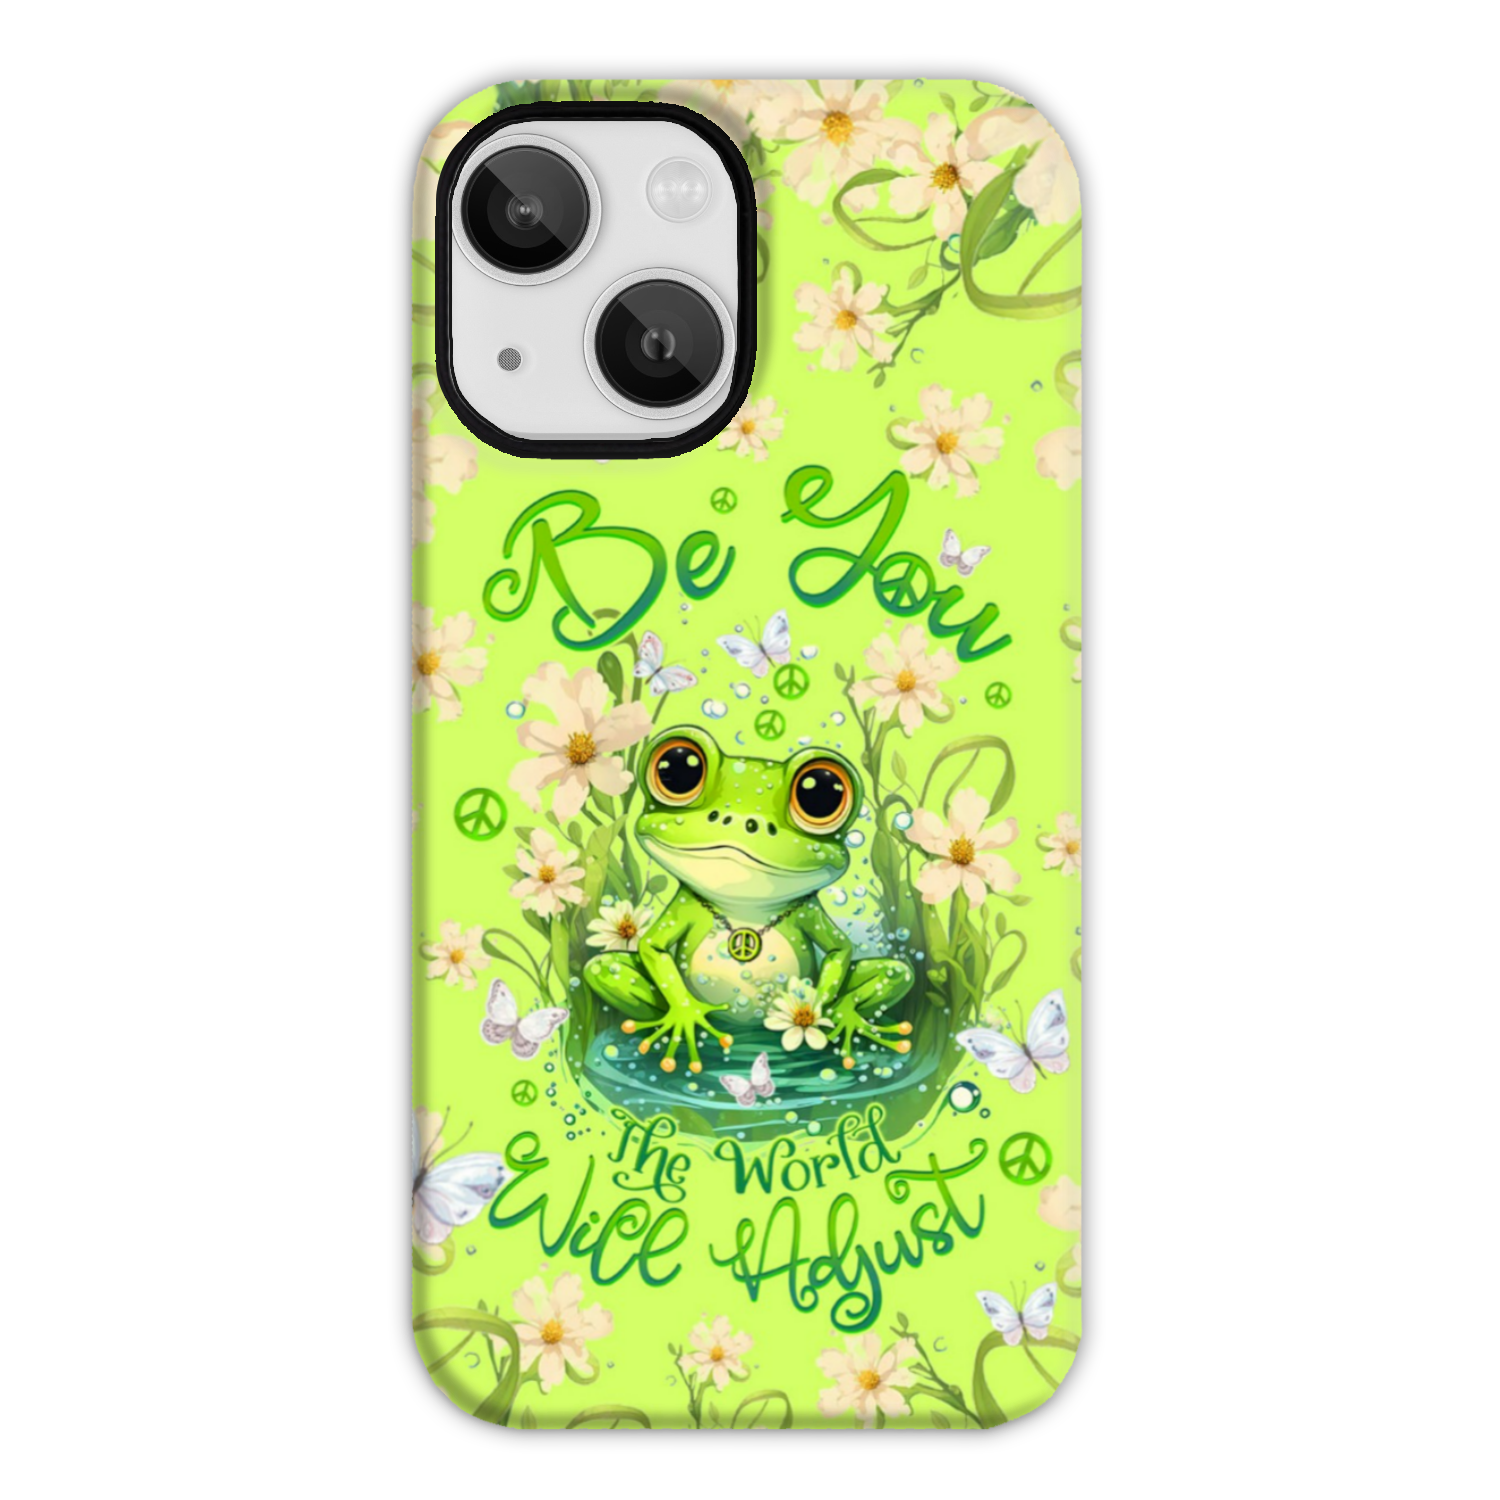 BE YOU THE WORLD WILL ADJUST FROG PHONE CASE - TLTW2709232